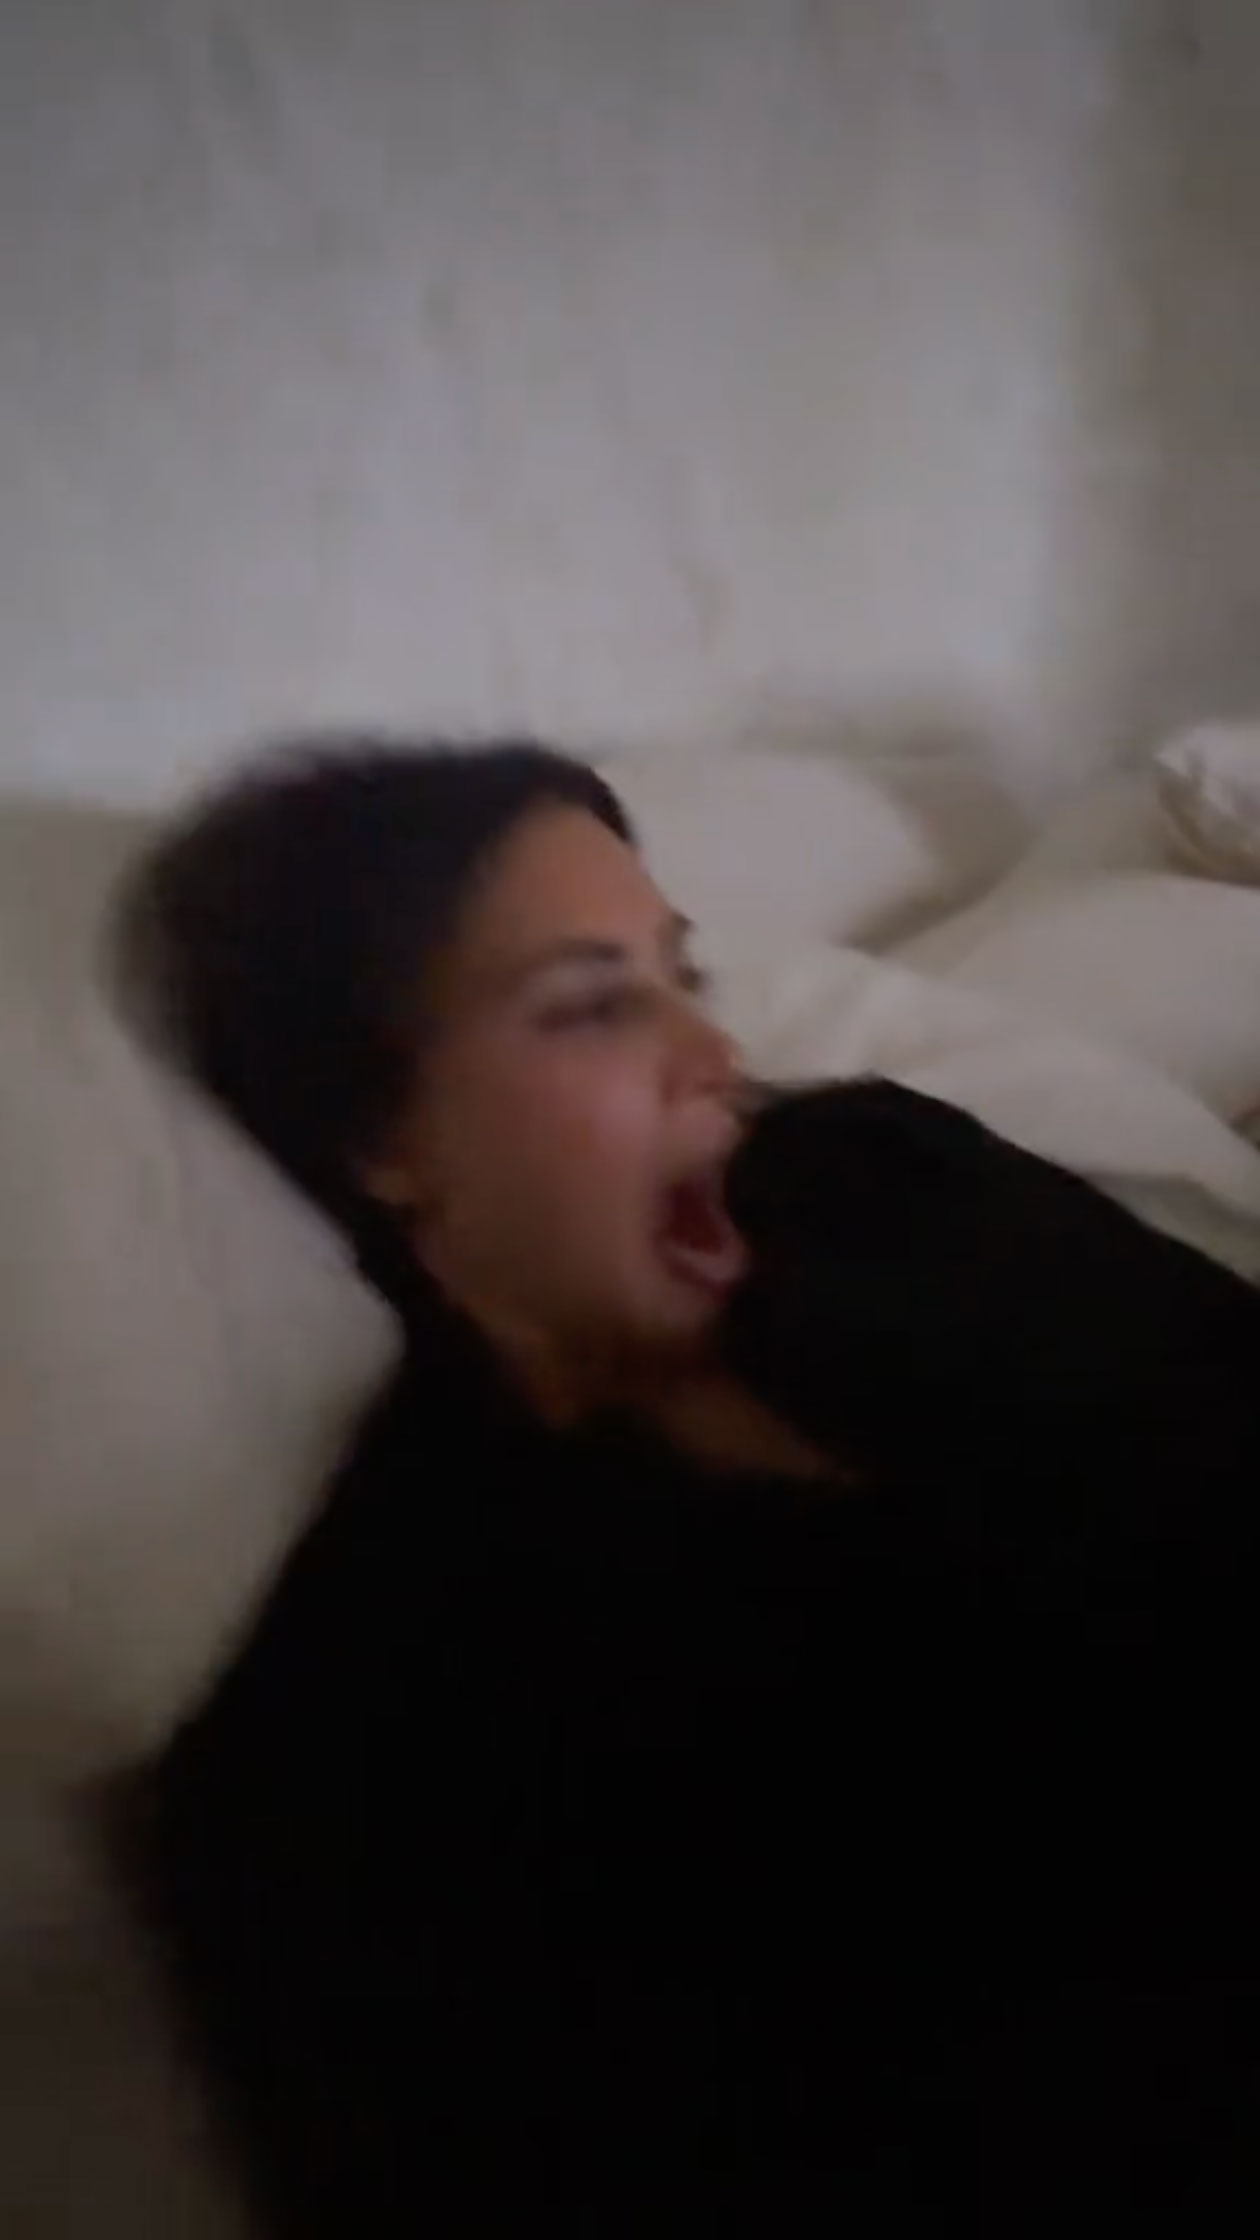 North shared another video of her mom in bed